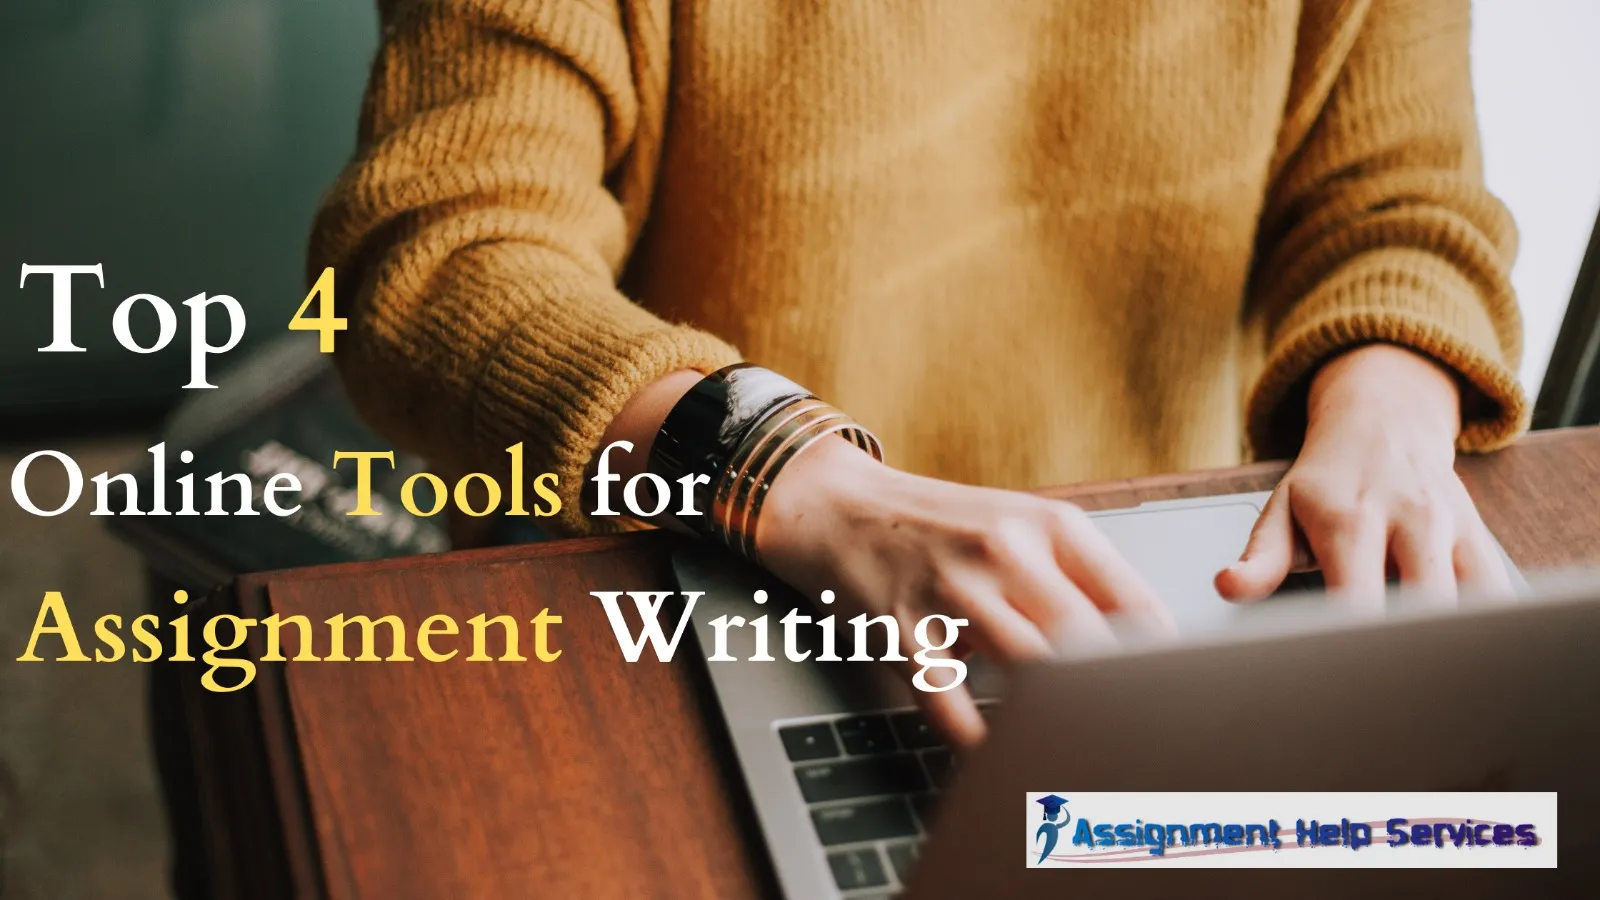 Top Four Online Tools for Assignment Writing